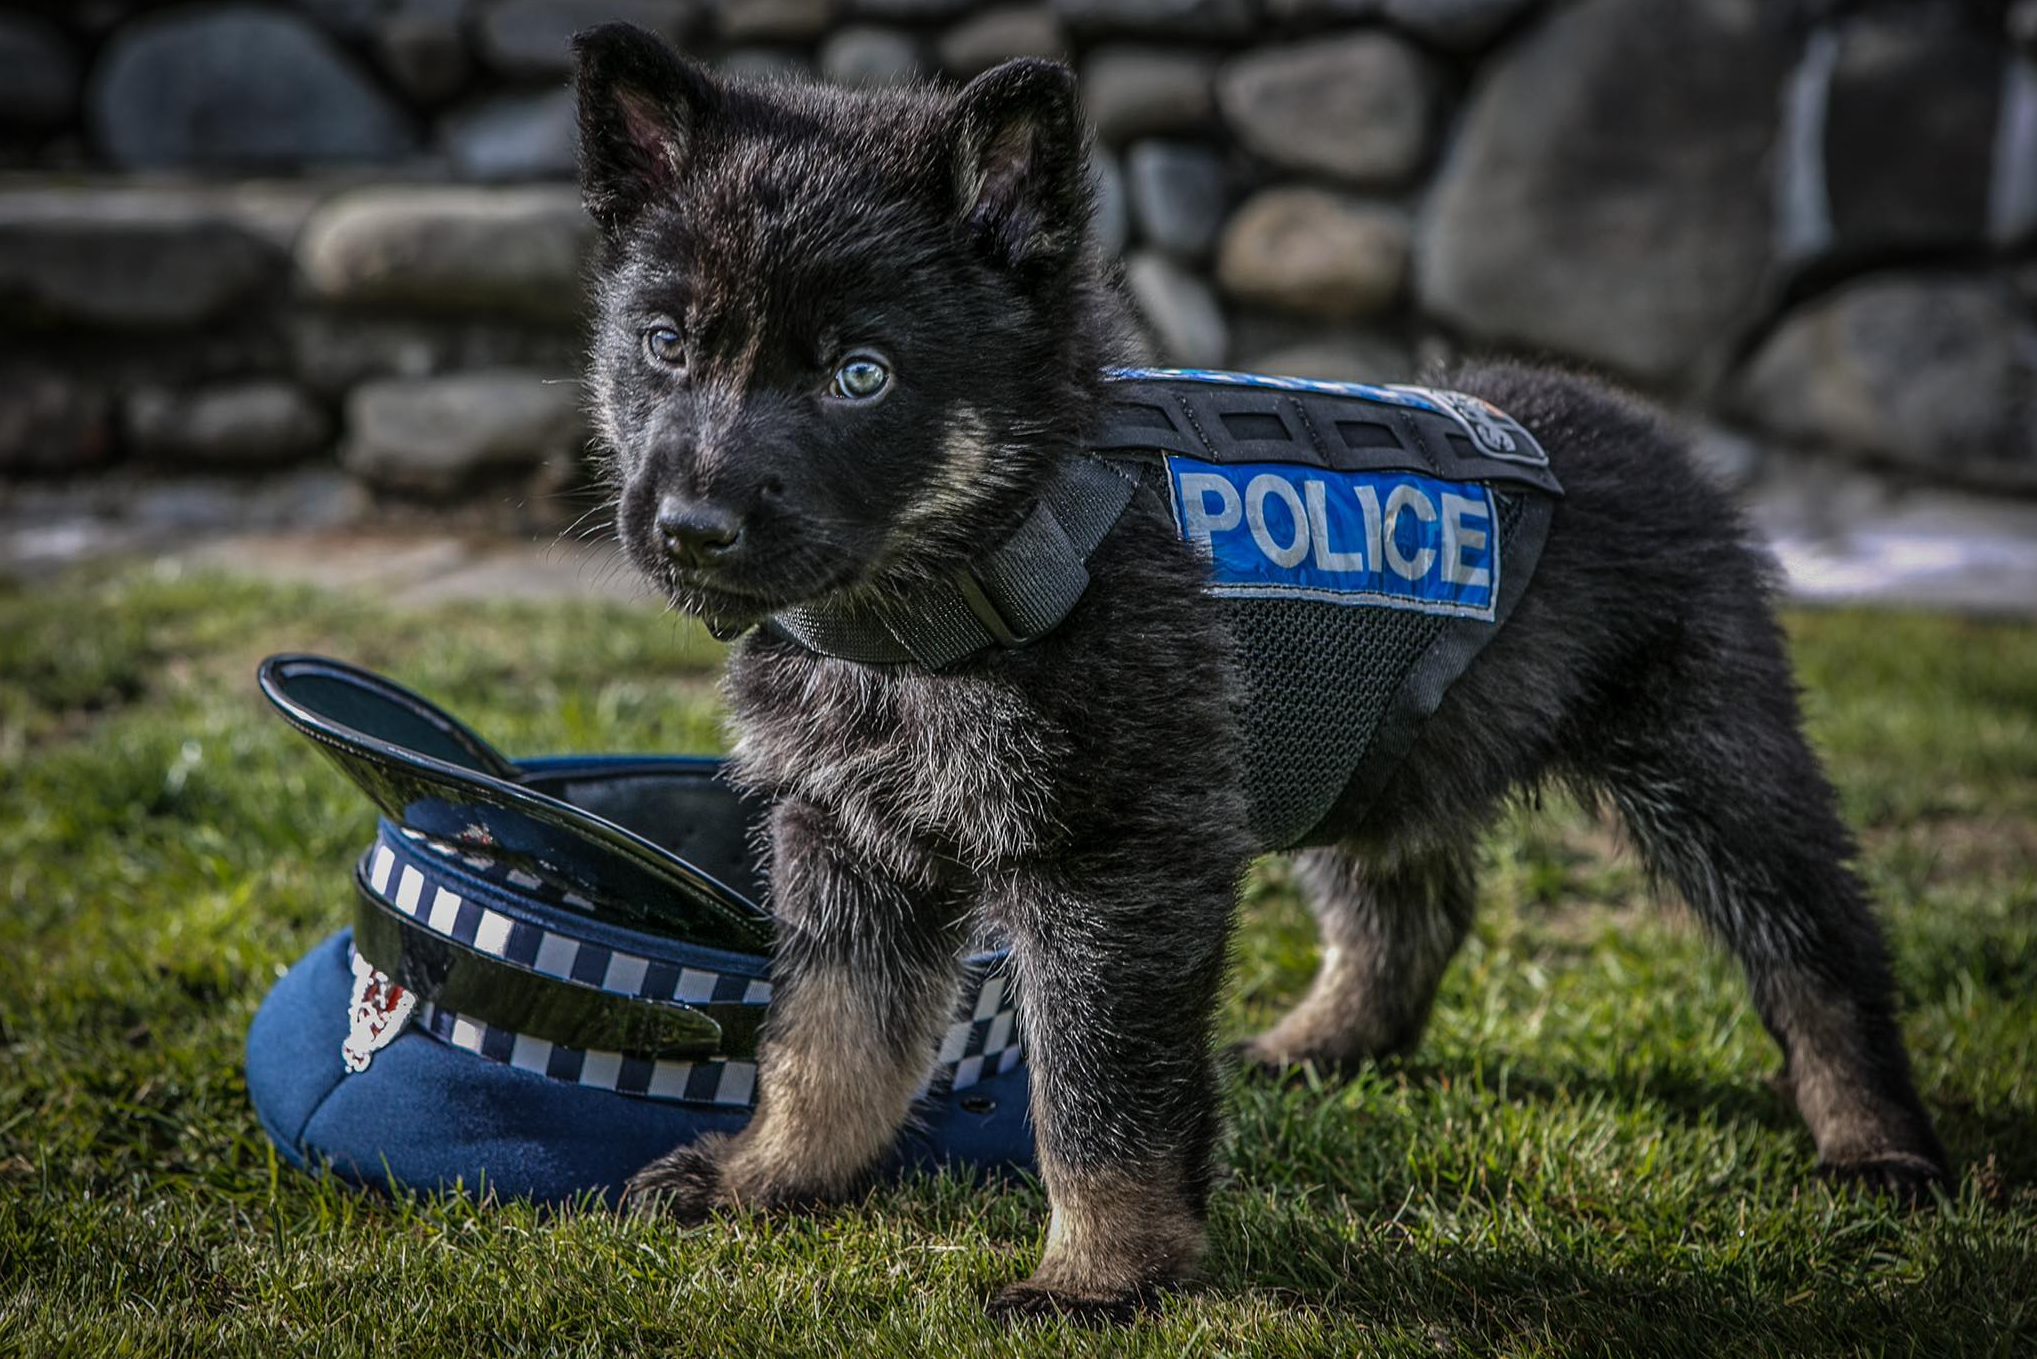 The newest recruit in the New Zealand Police force